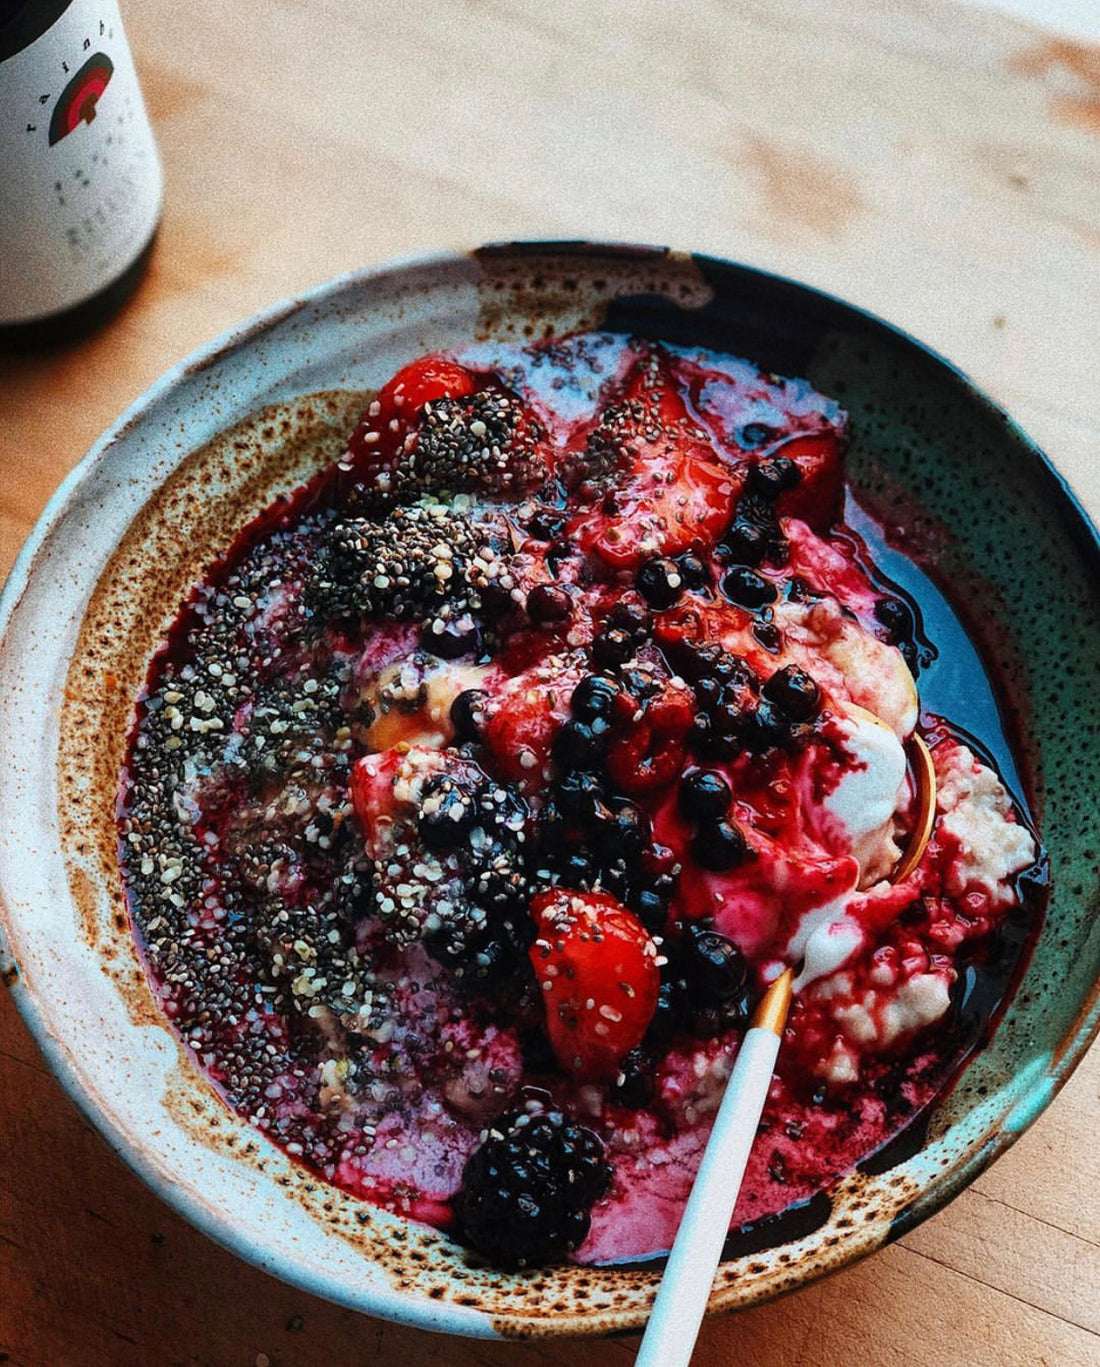 a bowl on a wooden counter with an oatmeal meal inside topped with chia seeds, blackberries, red strawberries, dark small blueberries, white coconut yogurt, and berry juices overflowing on the sides of the oatmeal. there is a spoon resting in the bowl